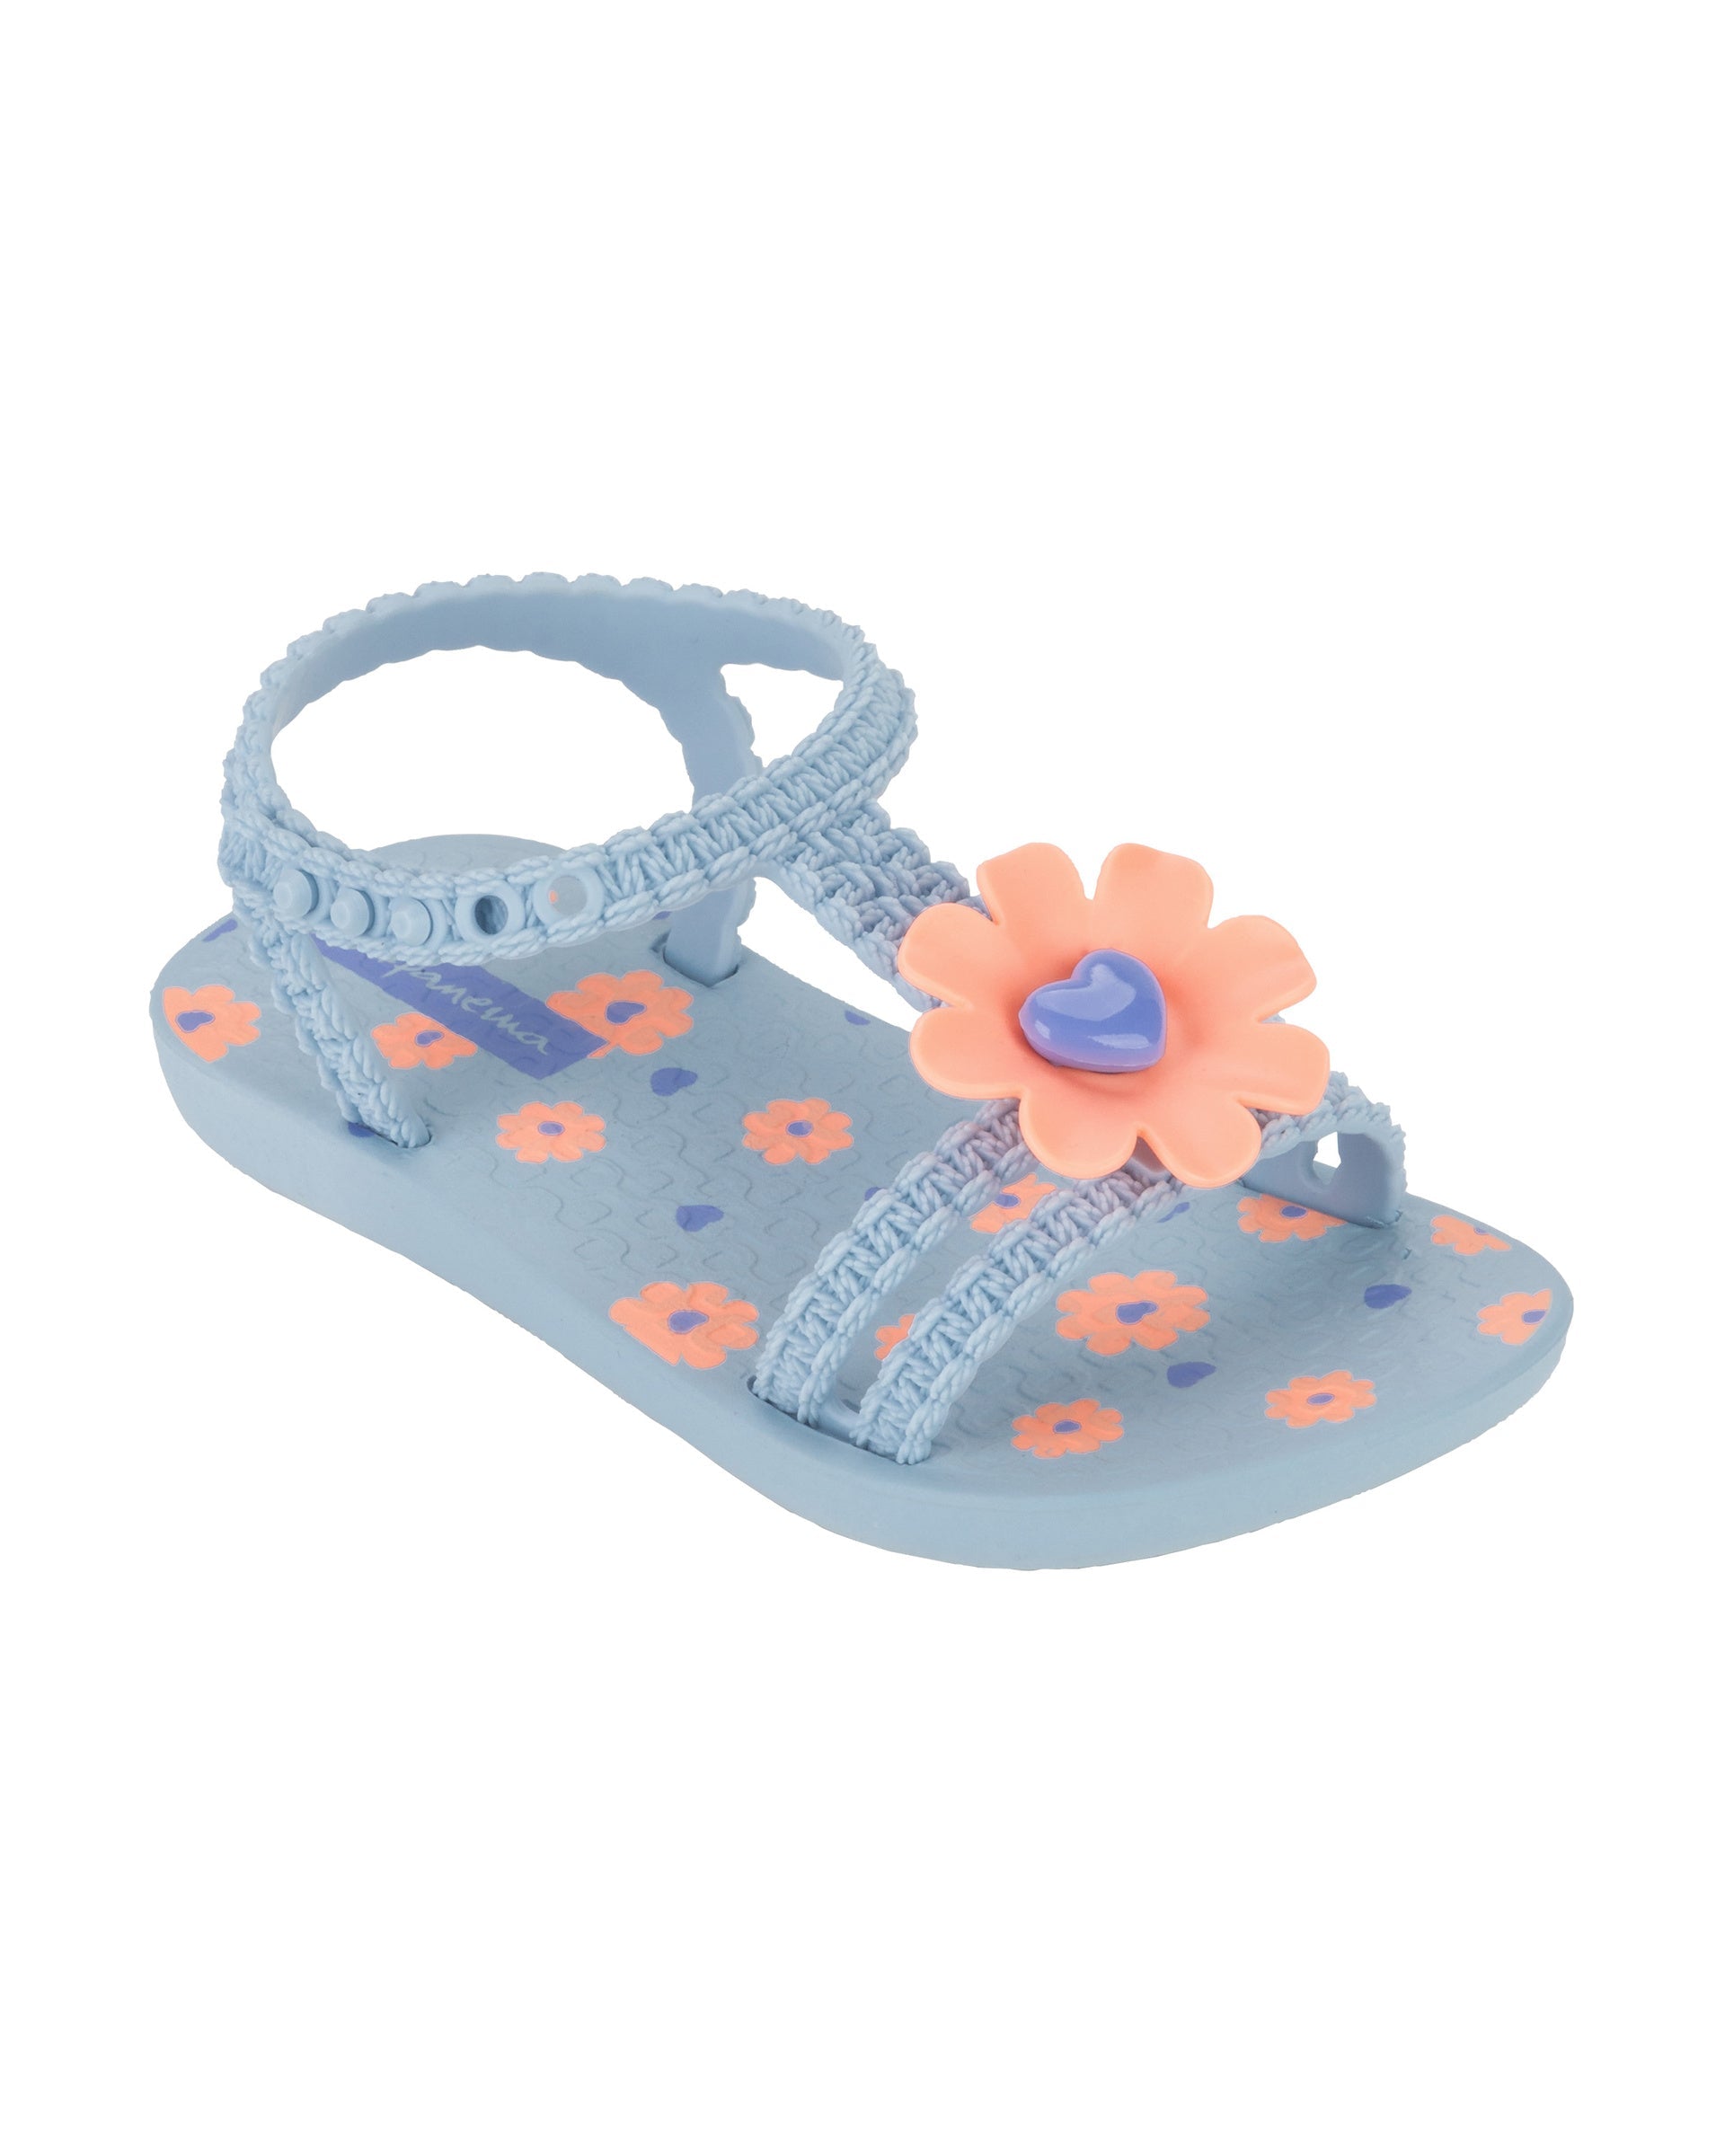 Angled view of a blue Ipanema Daisy baby sandal with pink flower on top and crochet texture .